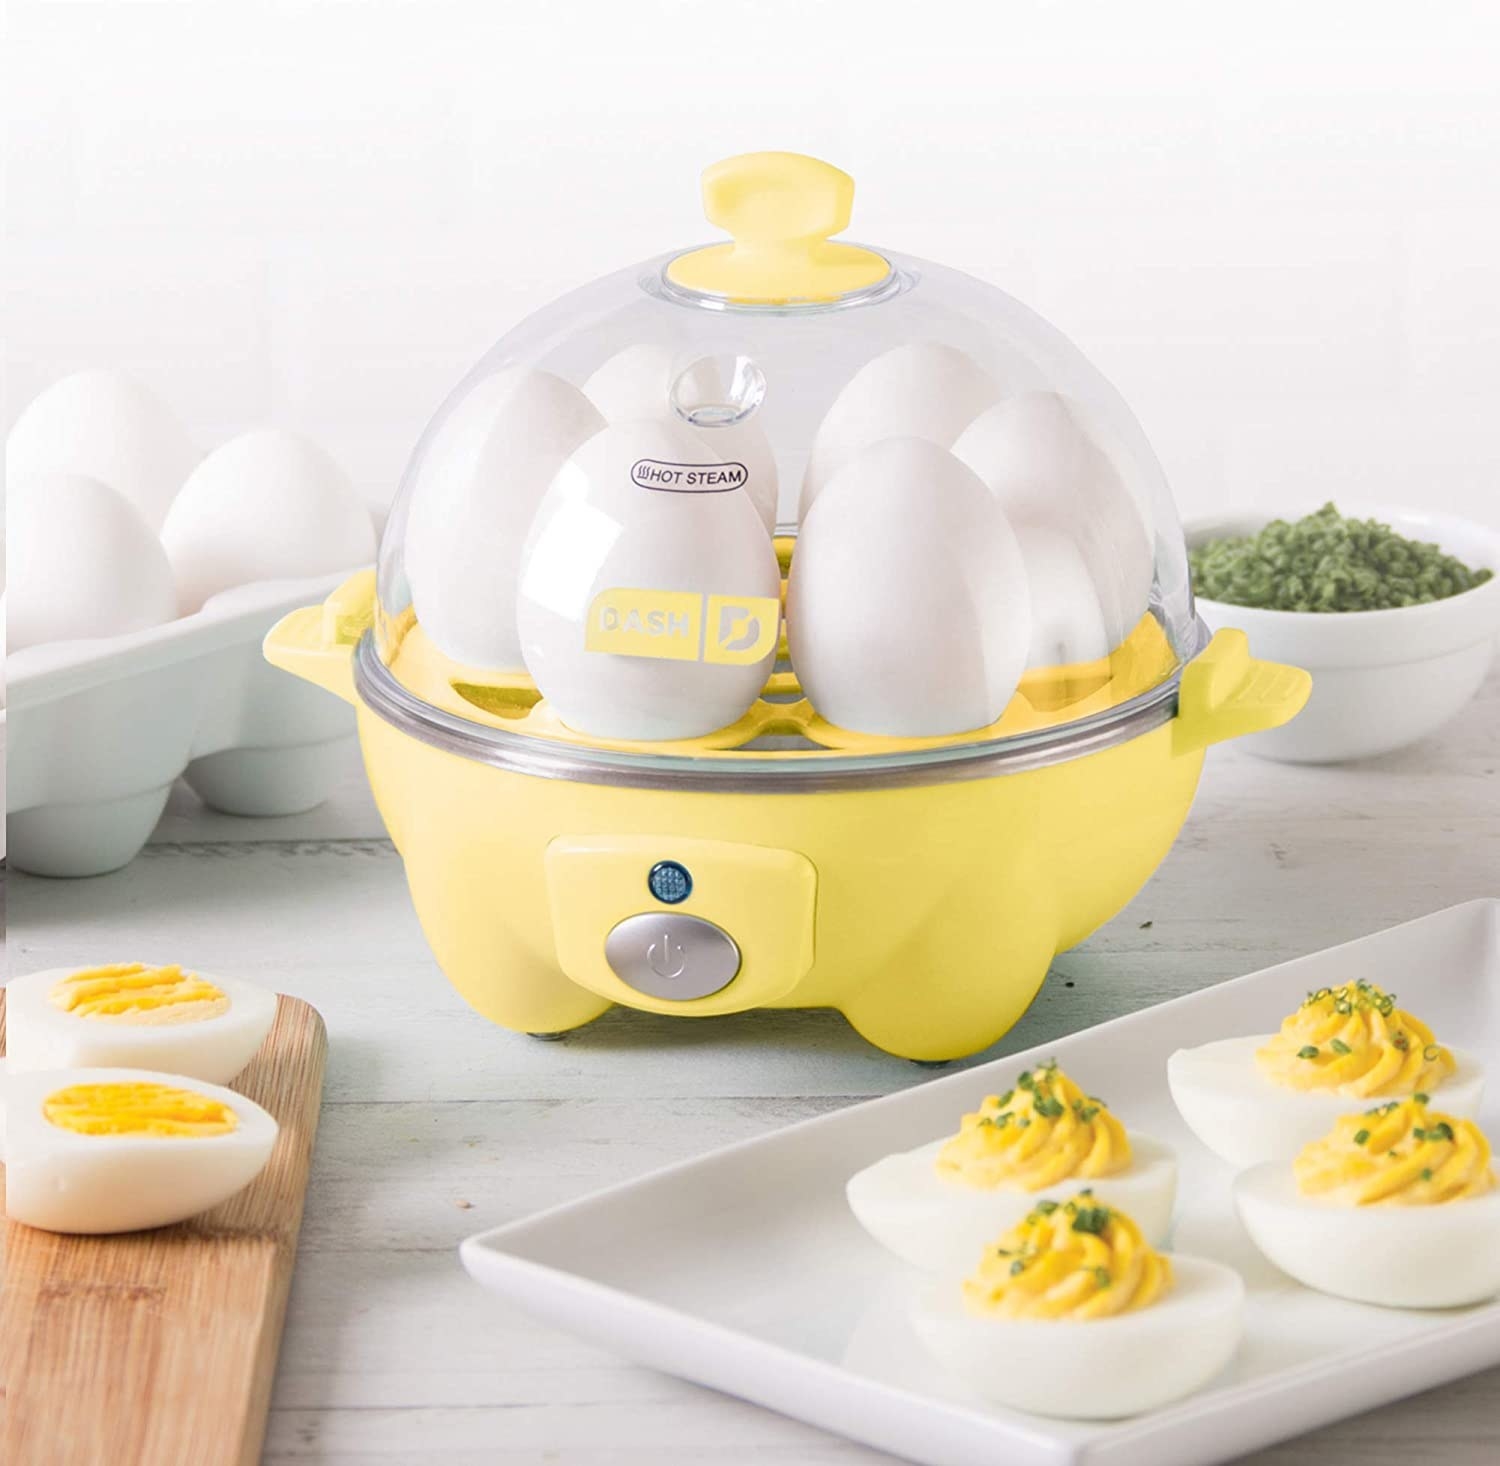 The egg cooker next to a plate of deviled eggs